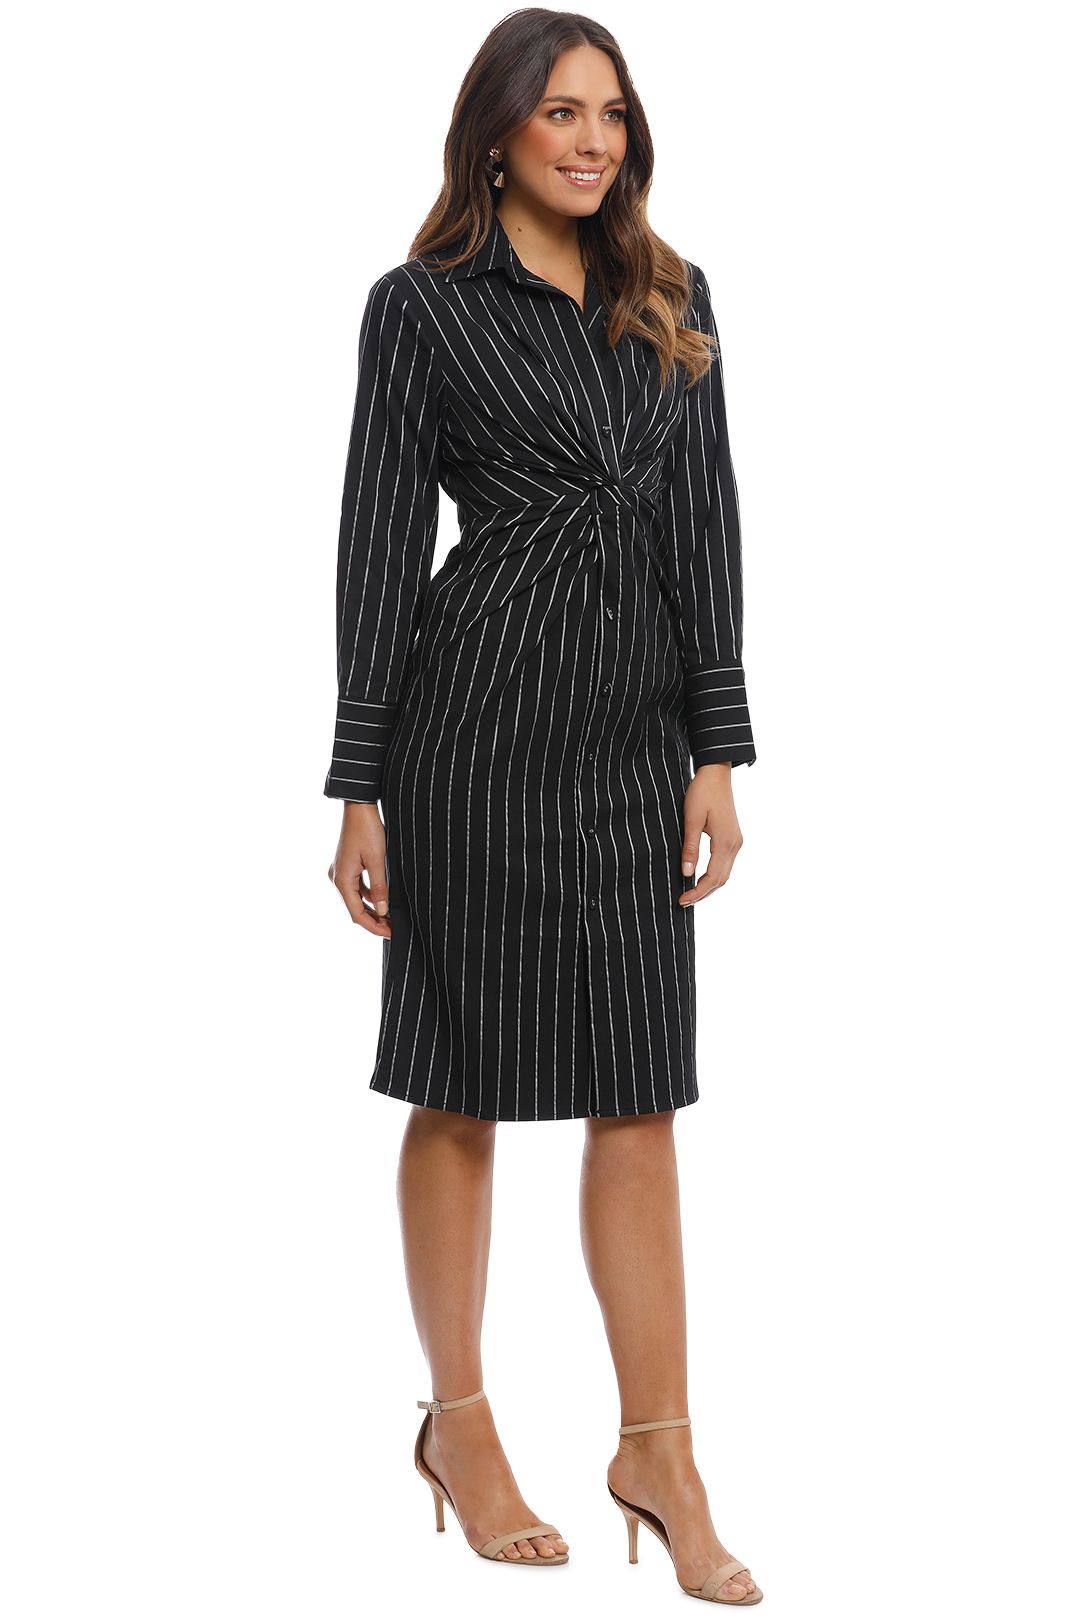 CMEO Collective - Still Motions Dress - Black - Side